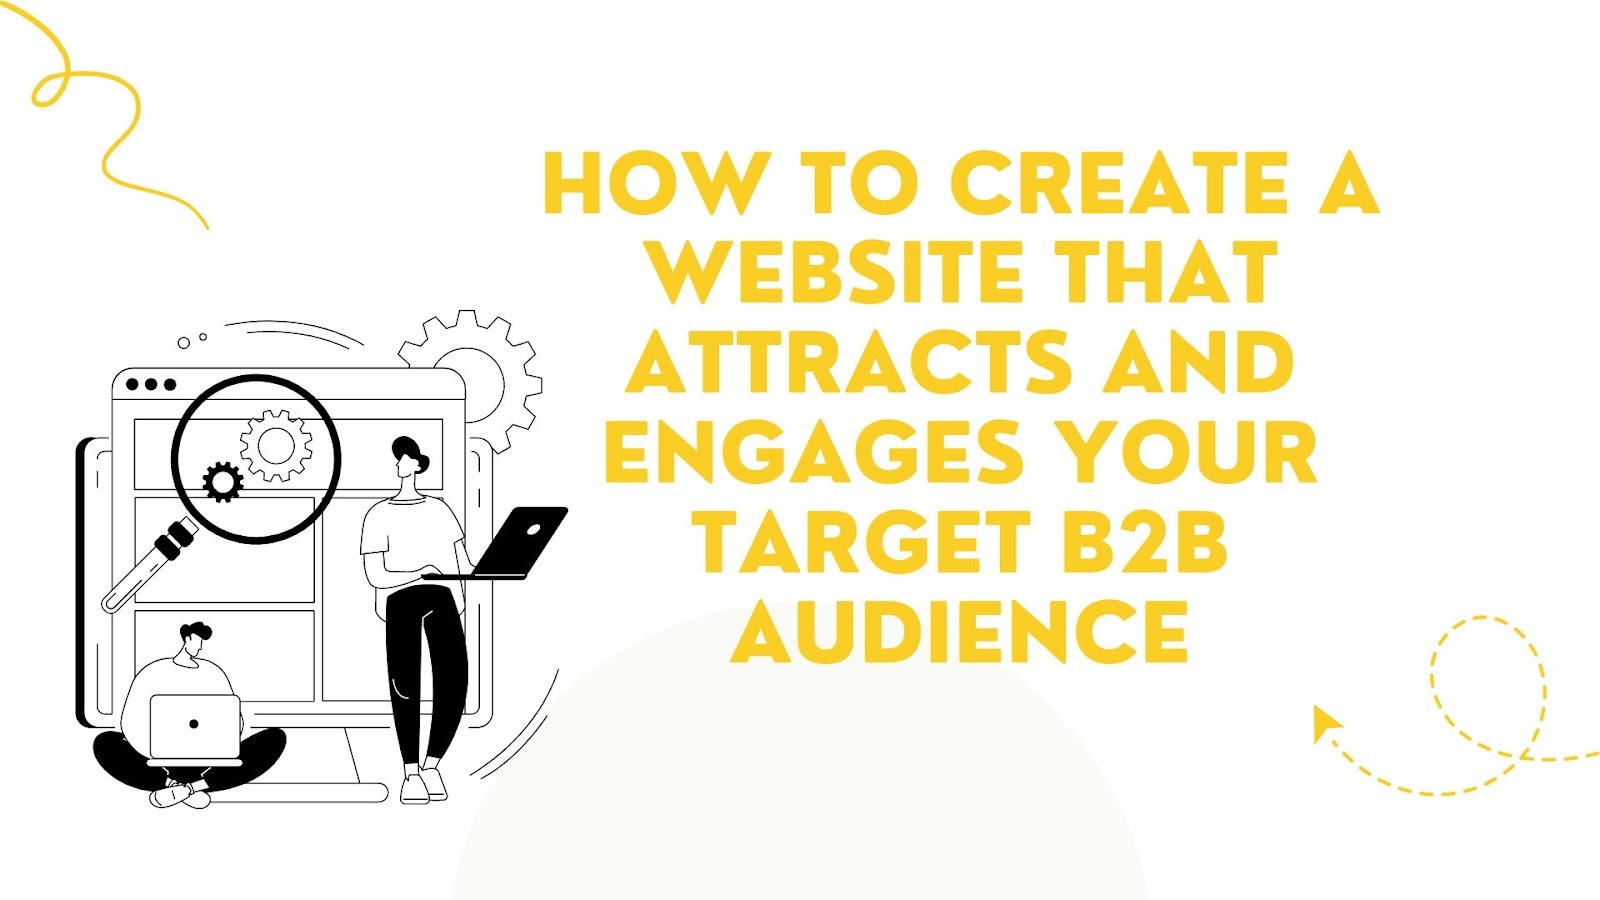 How to Create a Website That Attracts and Engages Your Target B2B Audience?